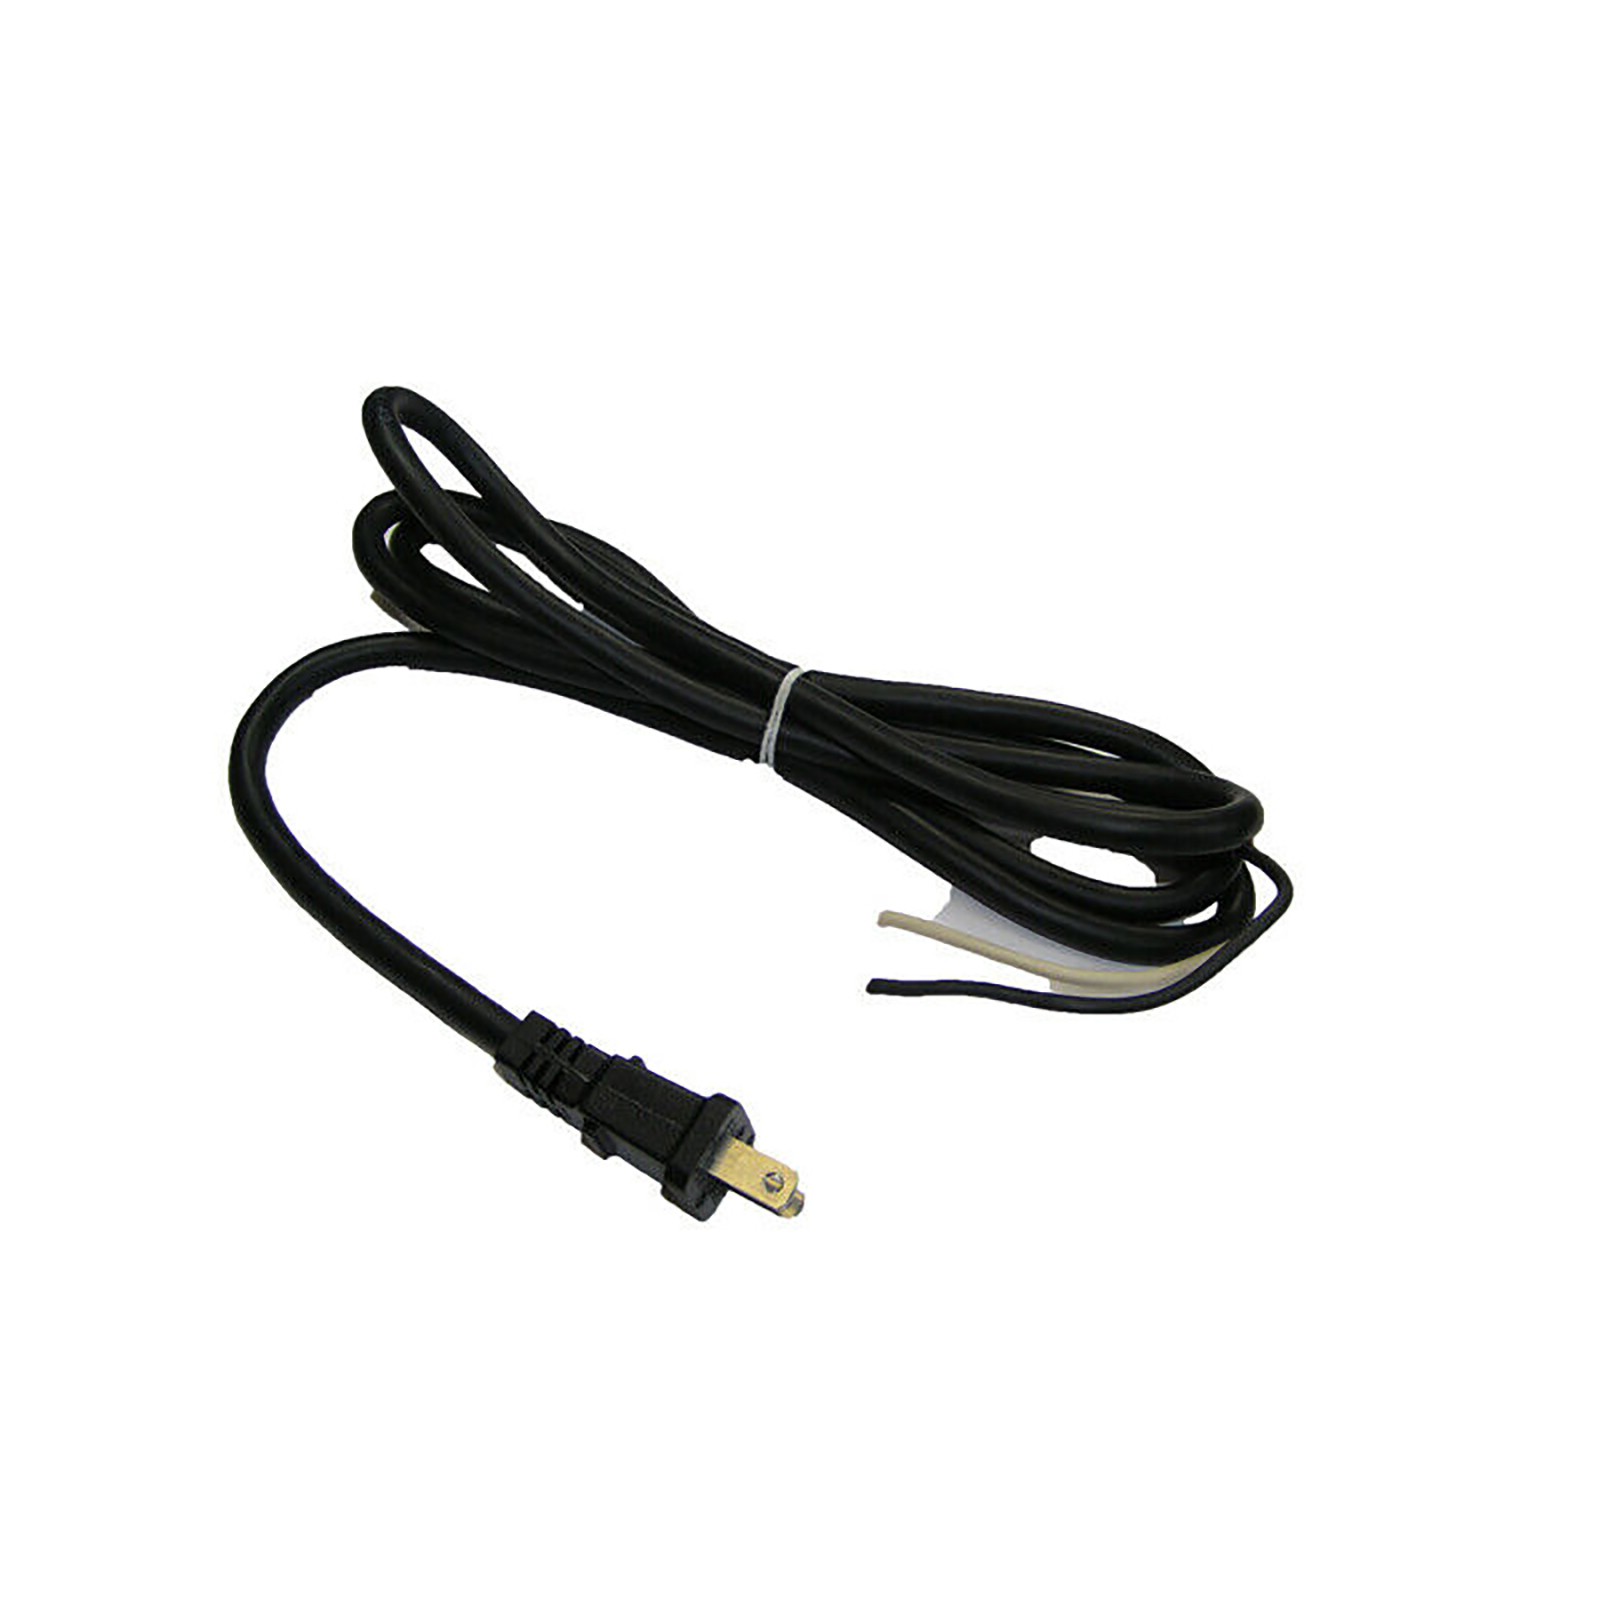 Bosch 7' Angle Grinder Replacement Cord